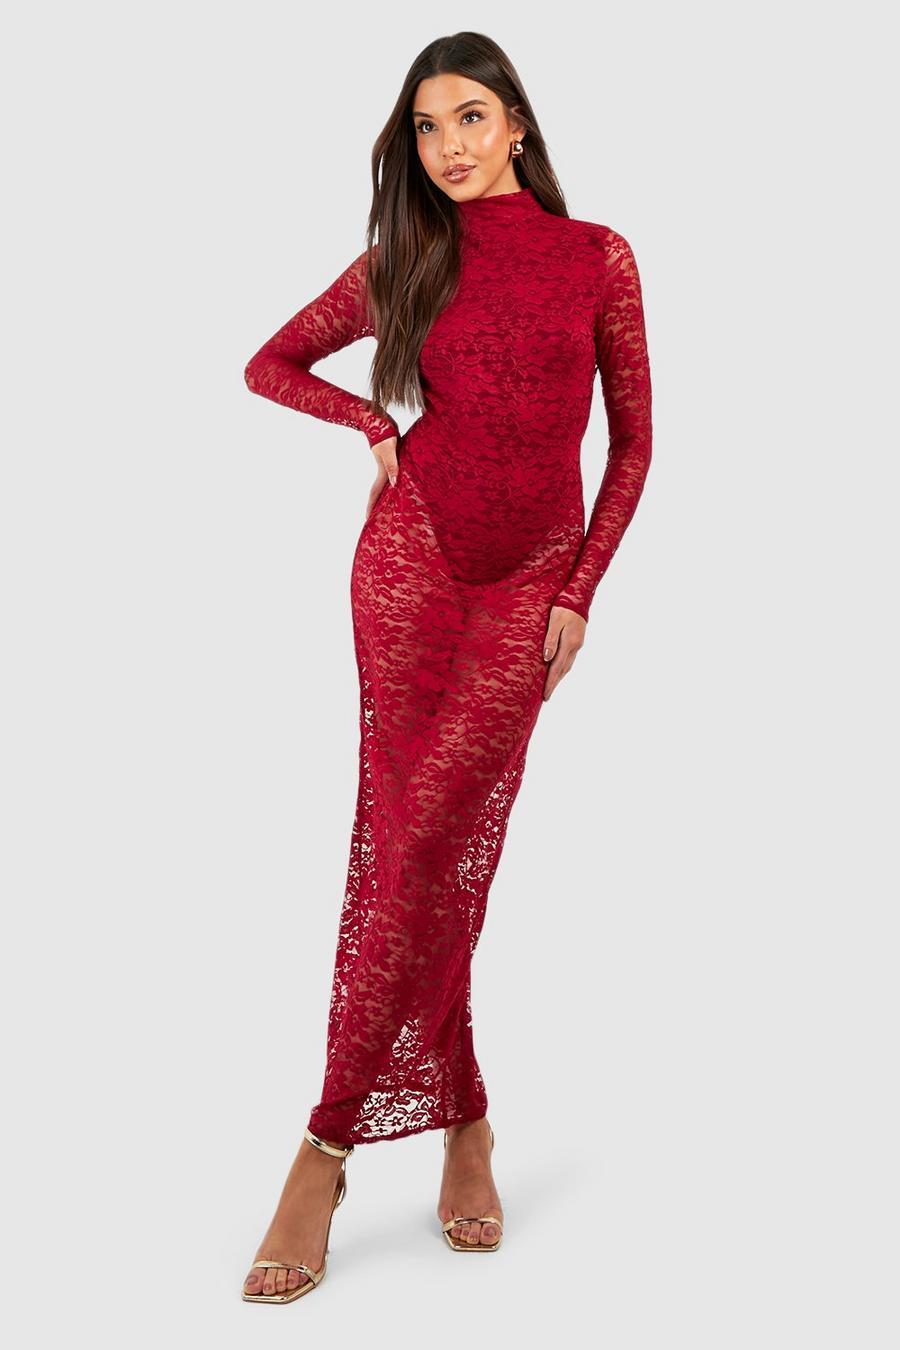 Berry red Lace High Neck Backless Maxi Dress